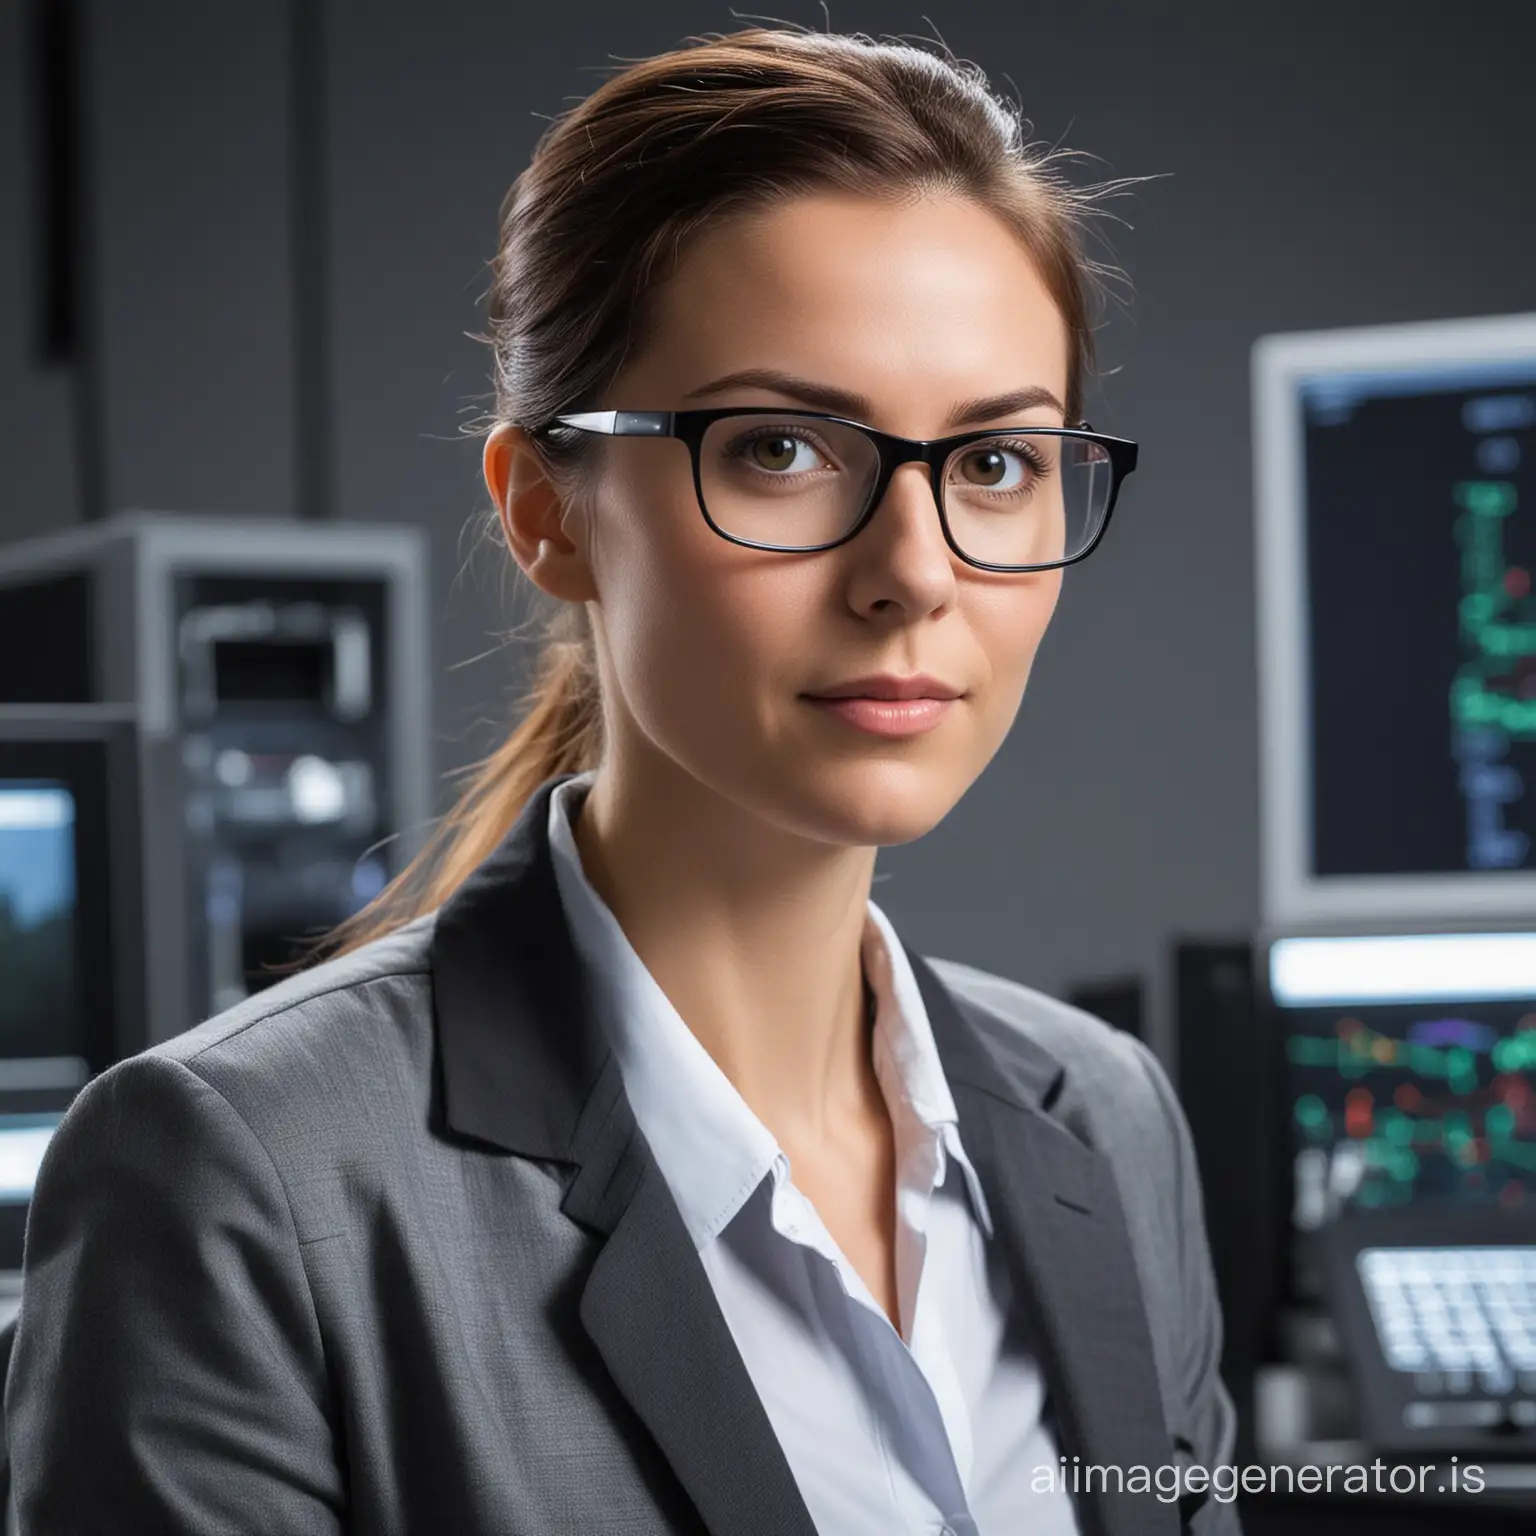 make me a picture of a female computer scientist